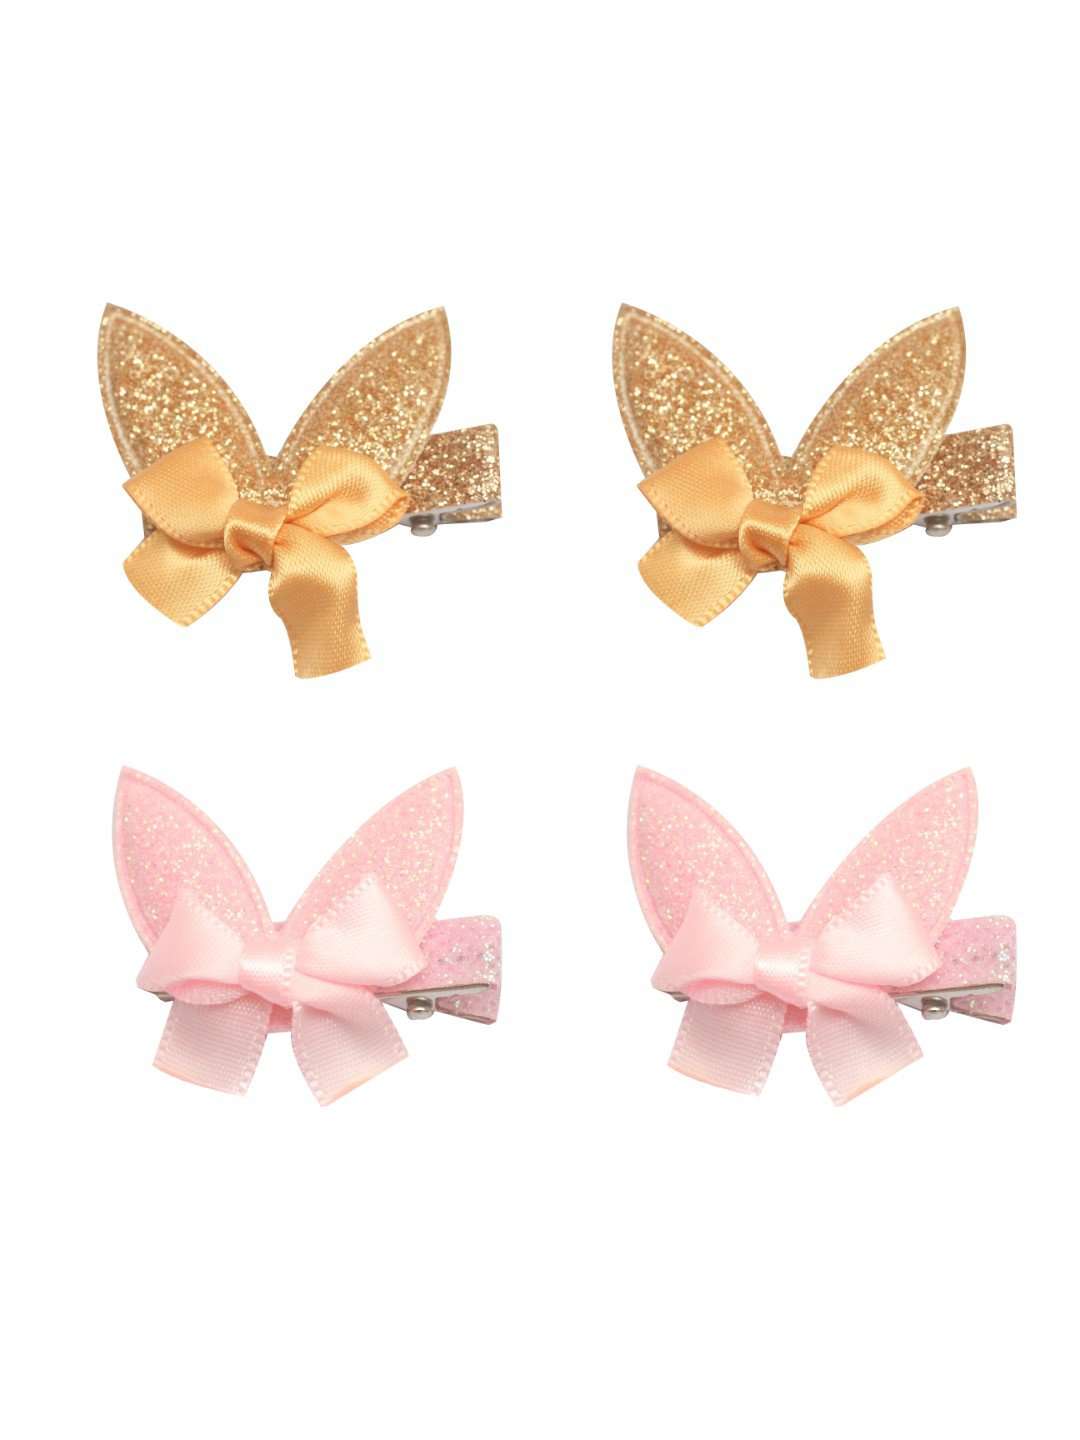 Stol'n Set of Gold and Light Pink Shiny Bunny Clip :Gold and Light Pink - SWHF